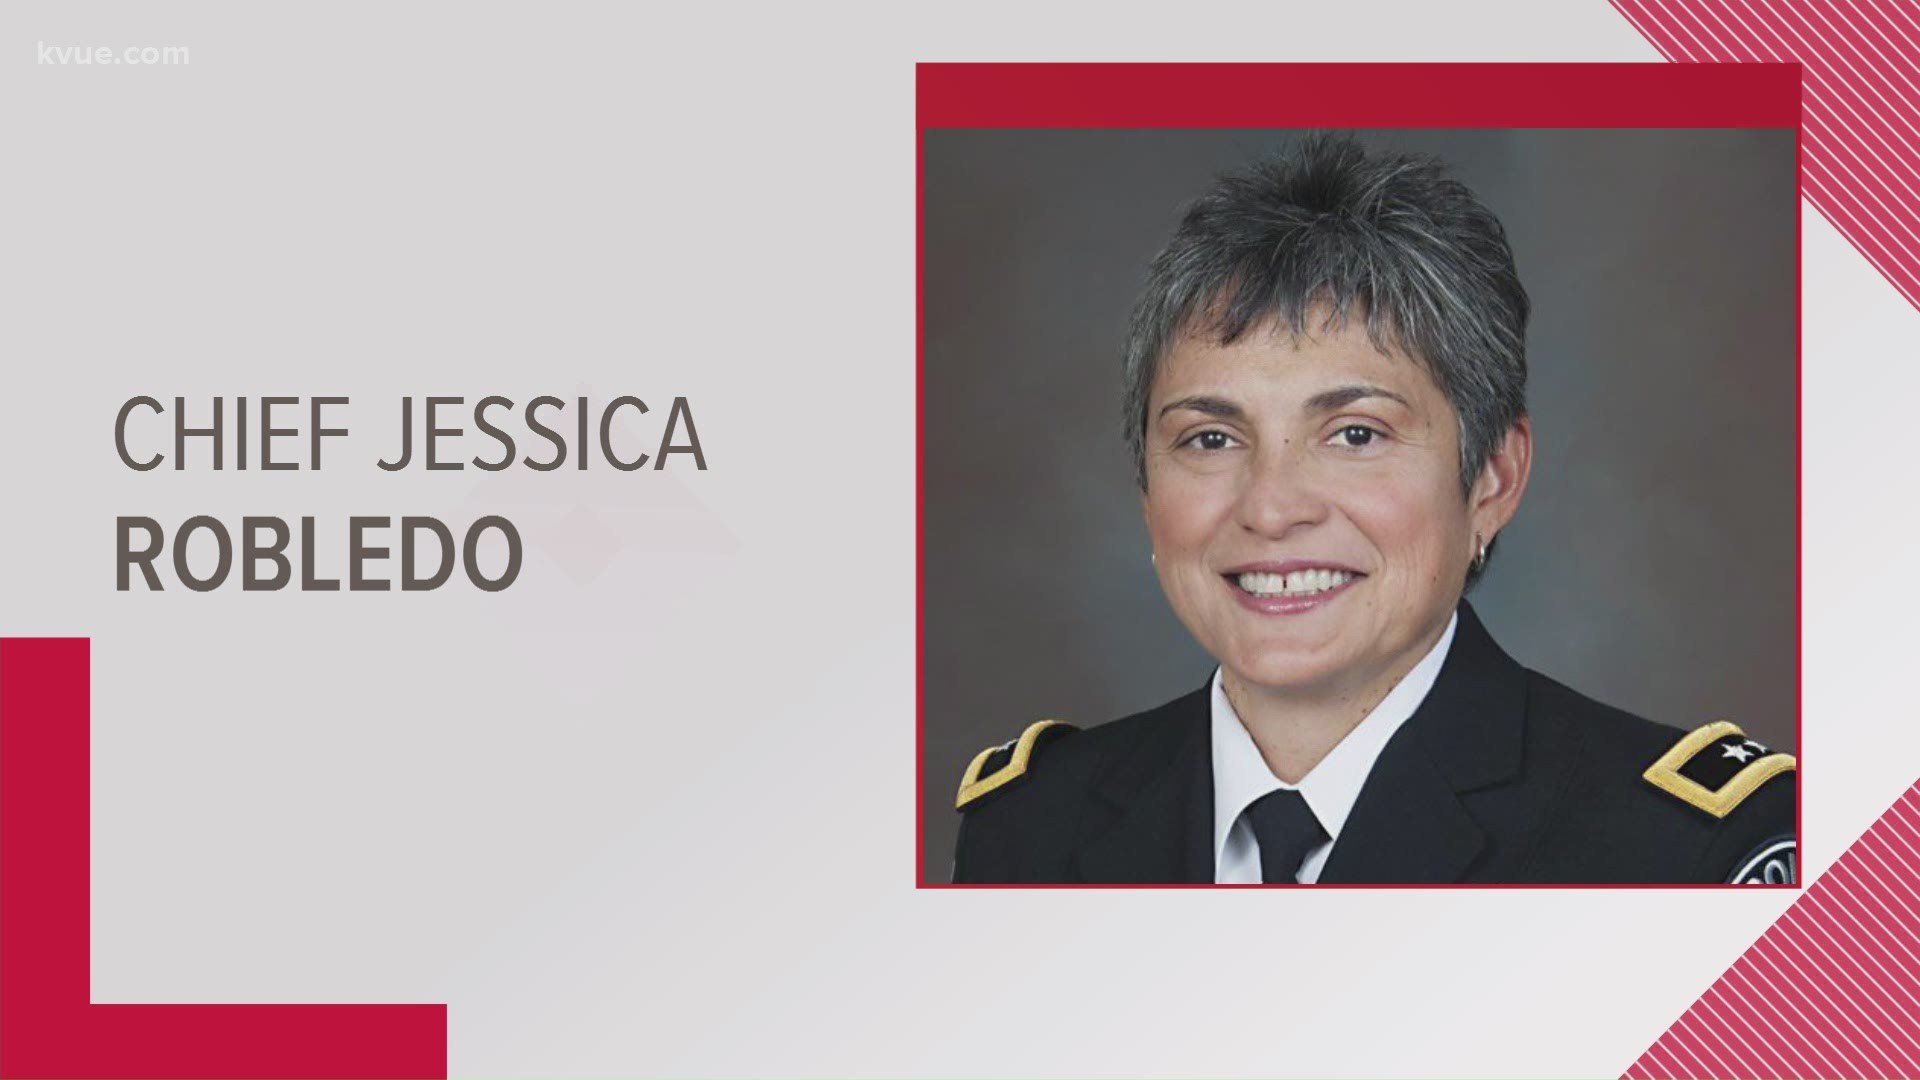 Chief Jessica Robledo is retiring from her role.